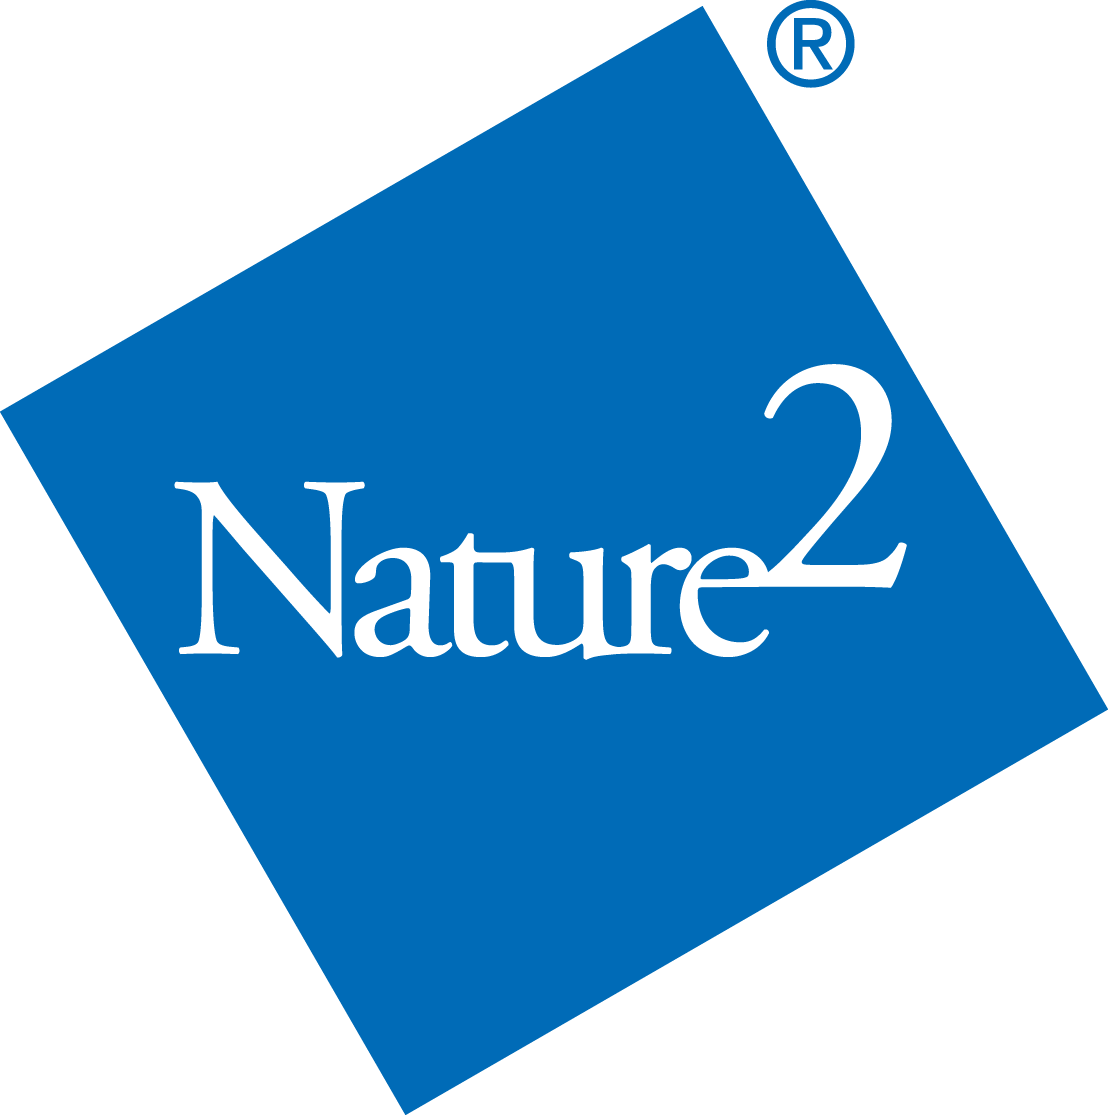 Nature2 logo — Pool Equipment in Narberth, PA